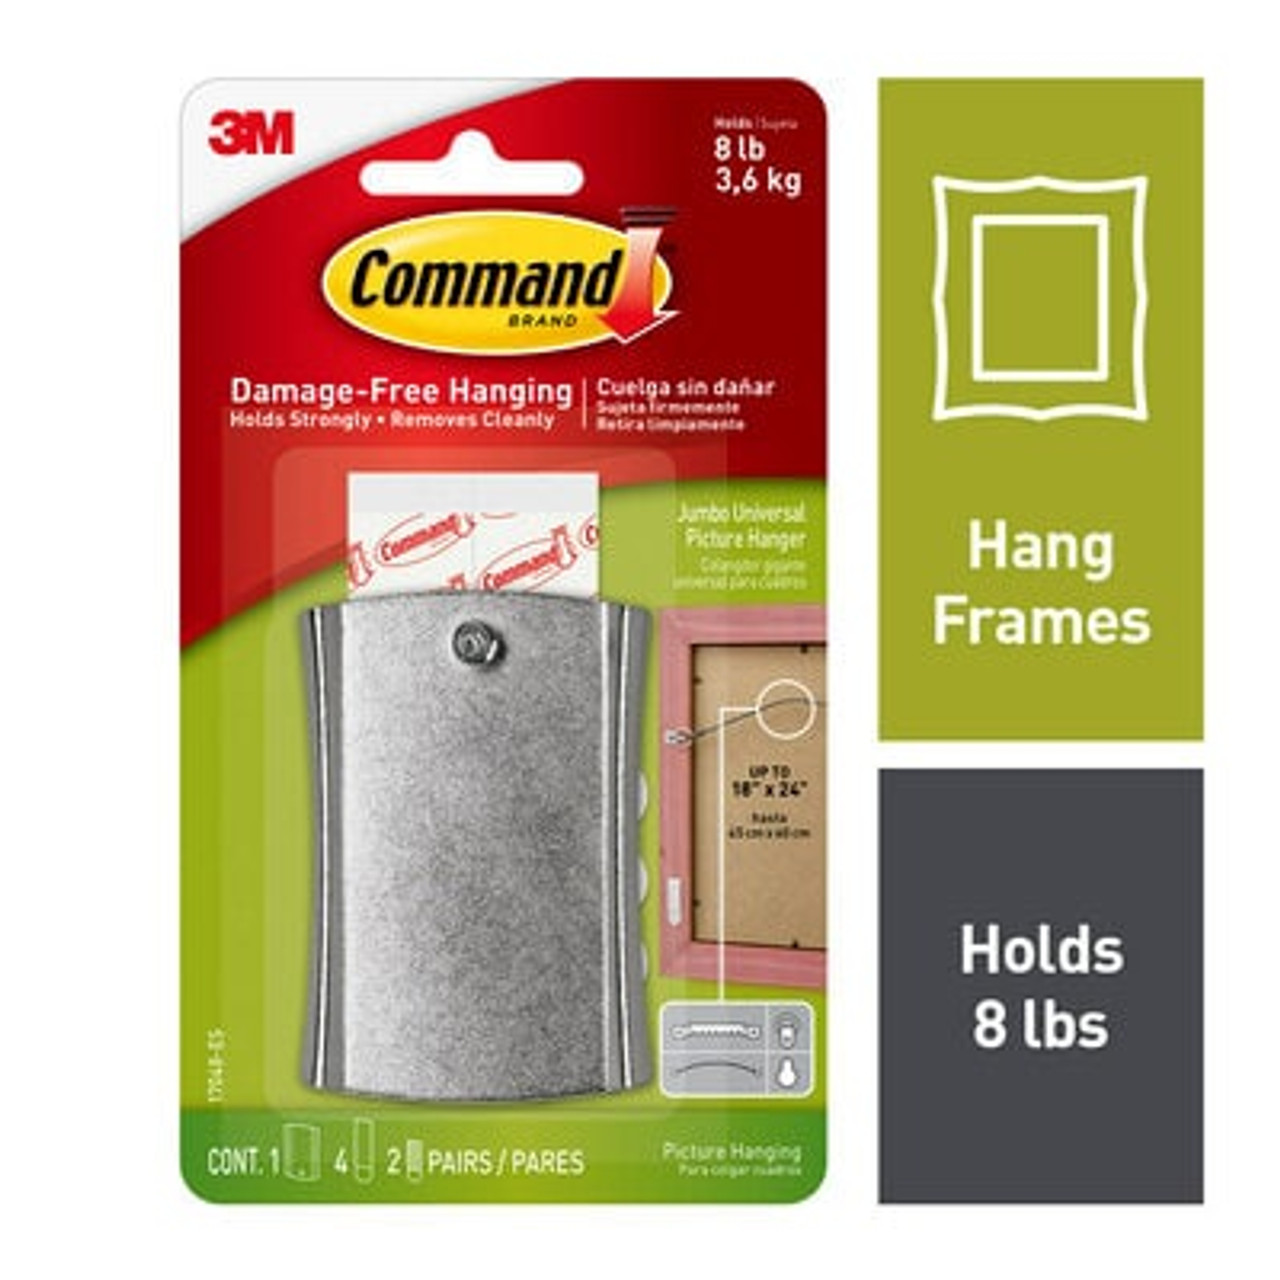 Command™ Jumbo Universal Picture Hanger w/Stabilizer Strips 17048-ES